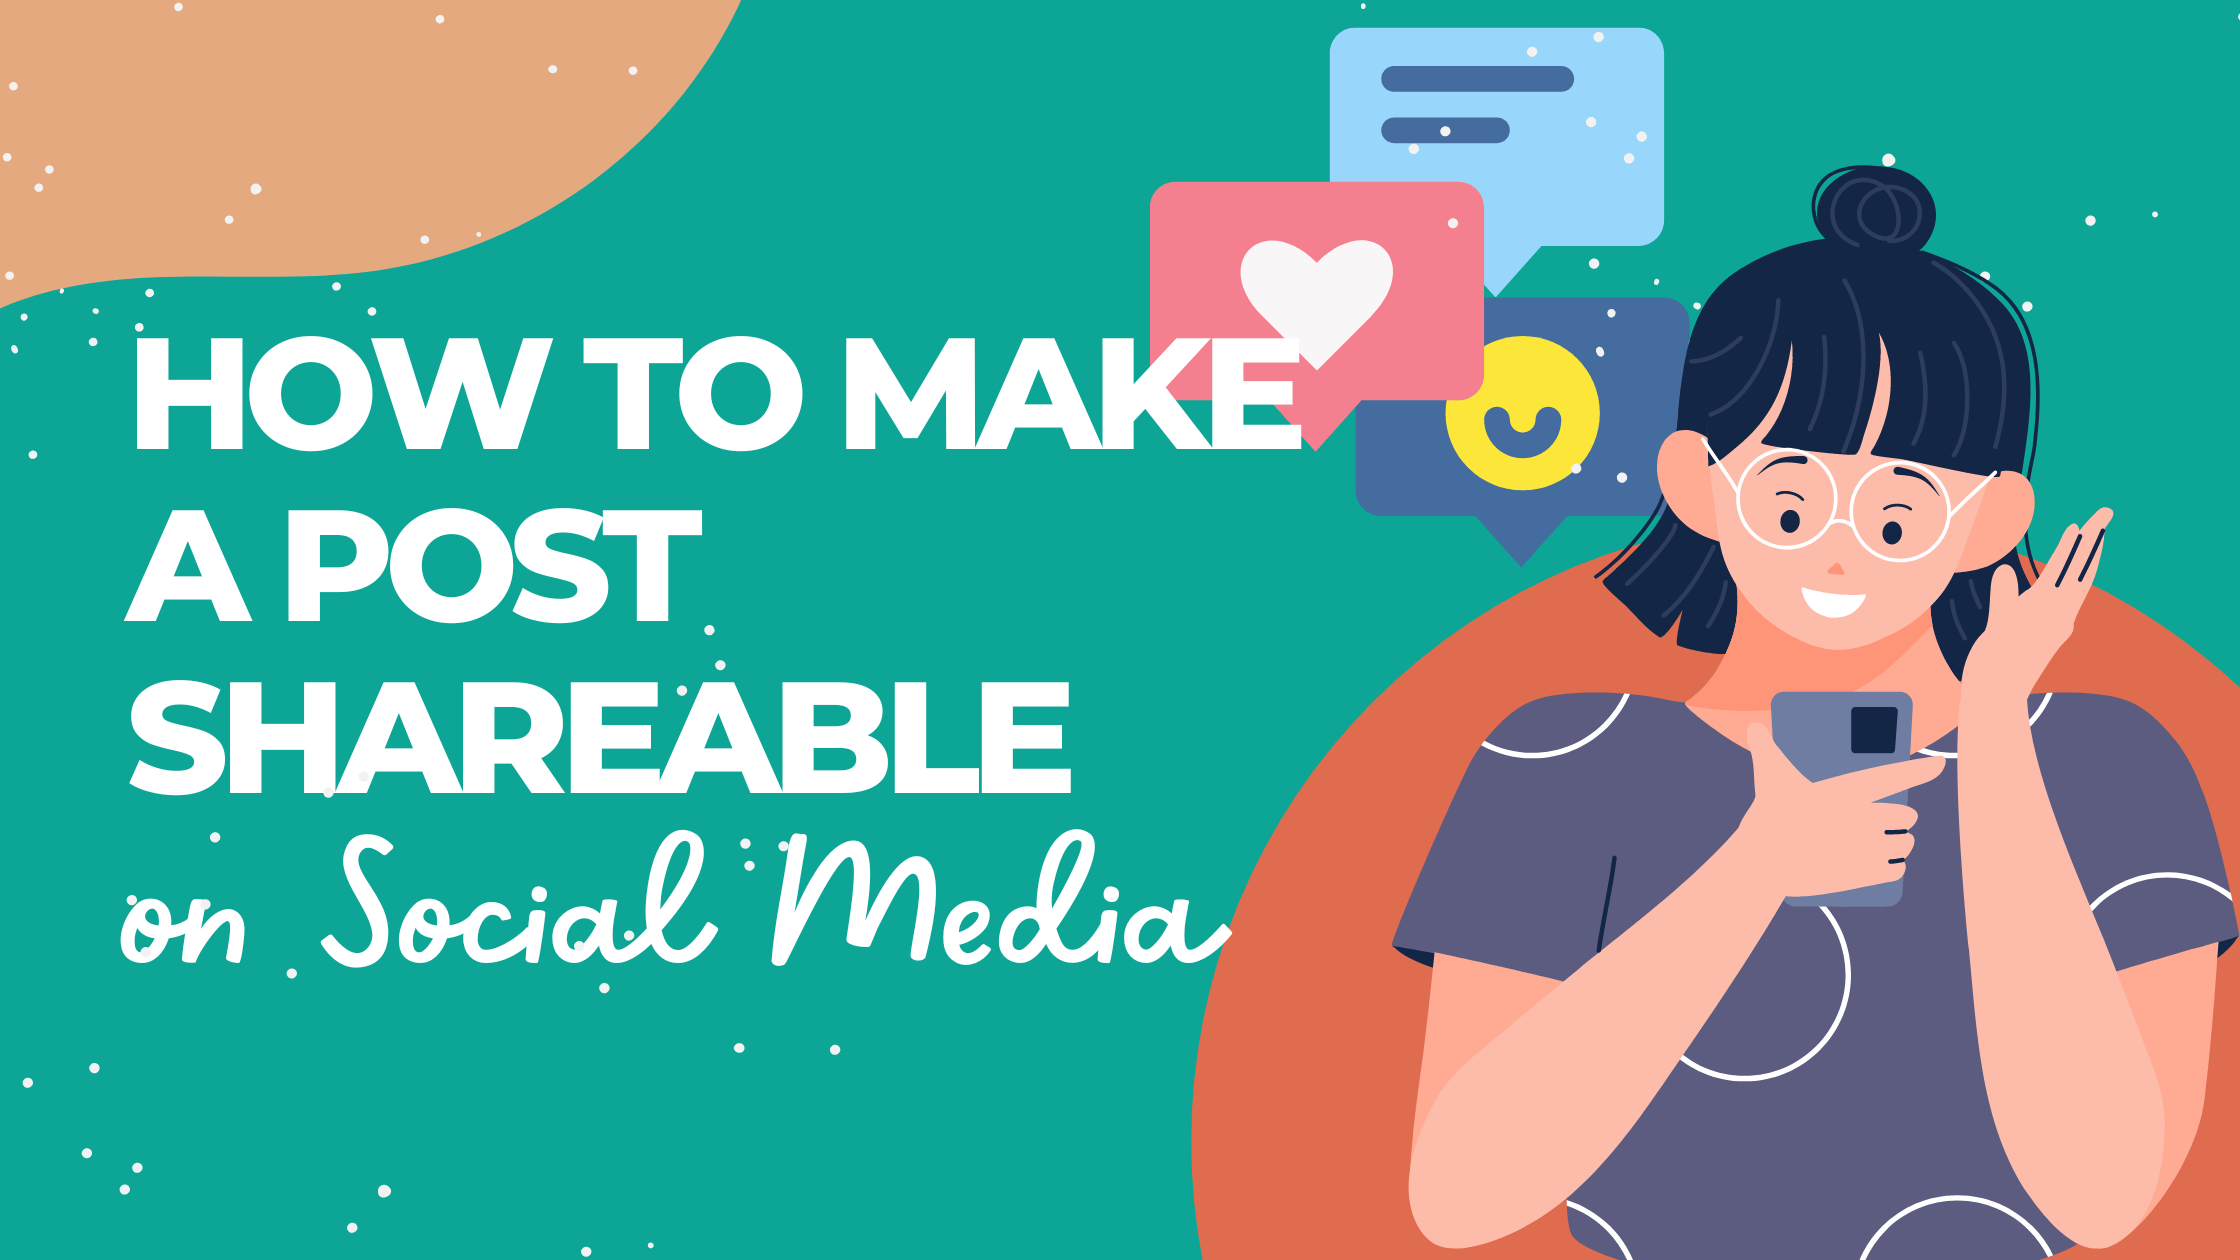 How To Make a Post Shareable on Social Media: A Step-by-Step Guide